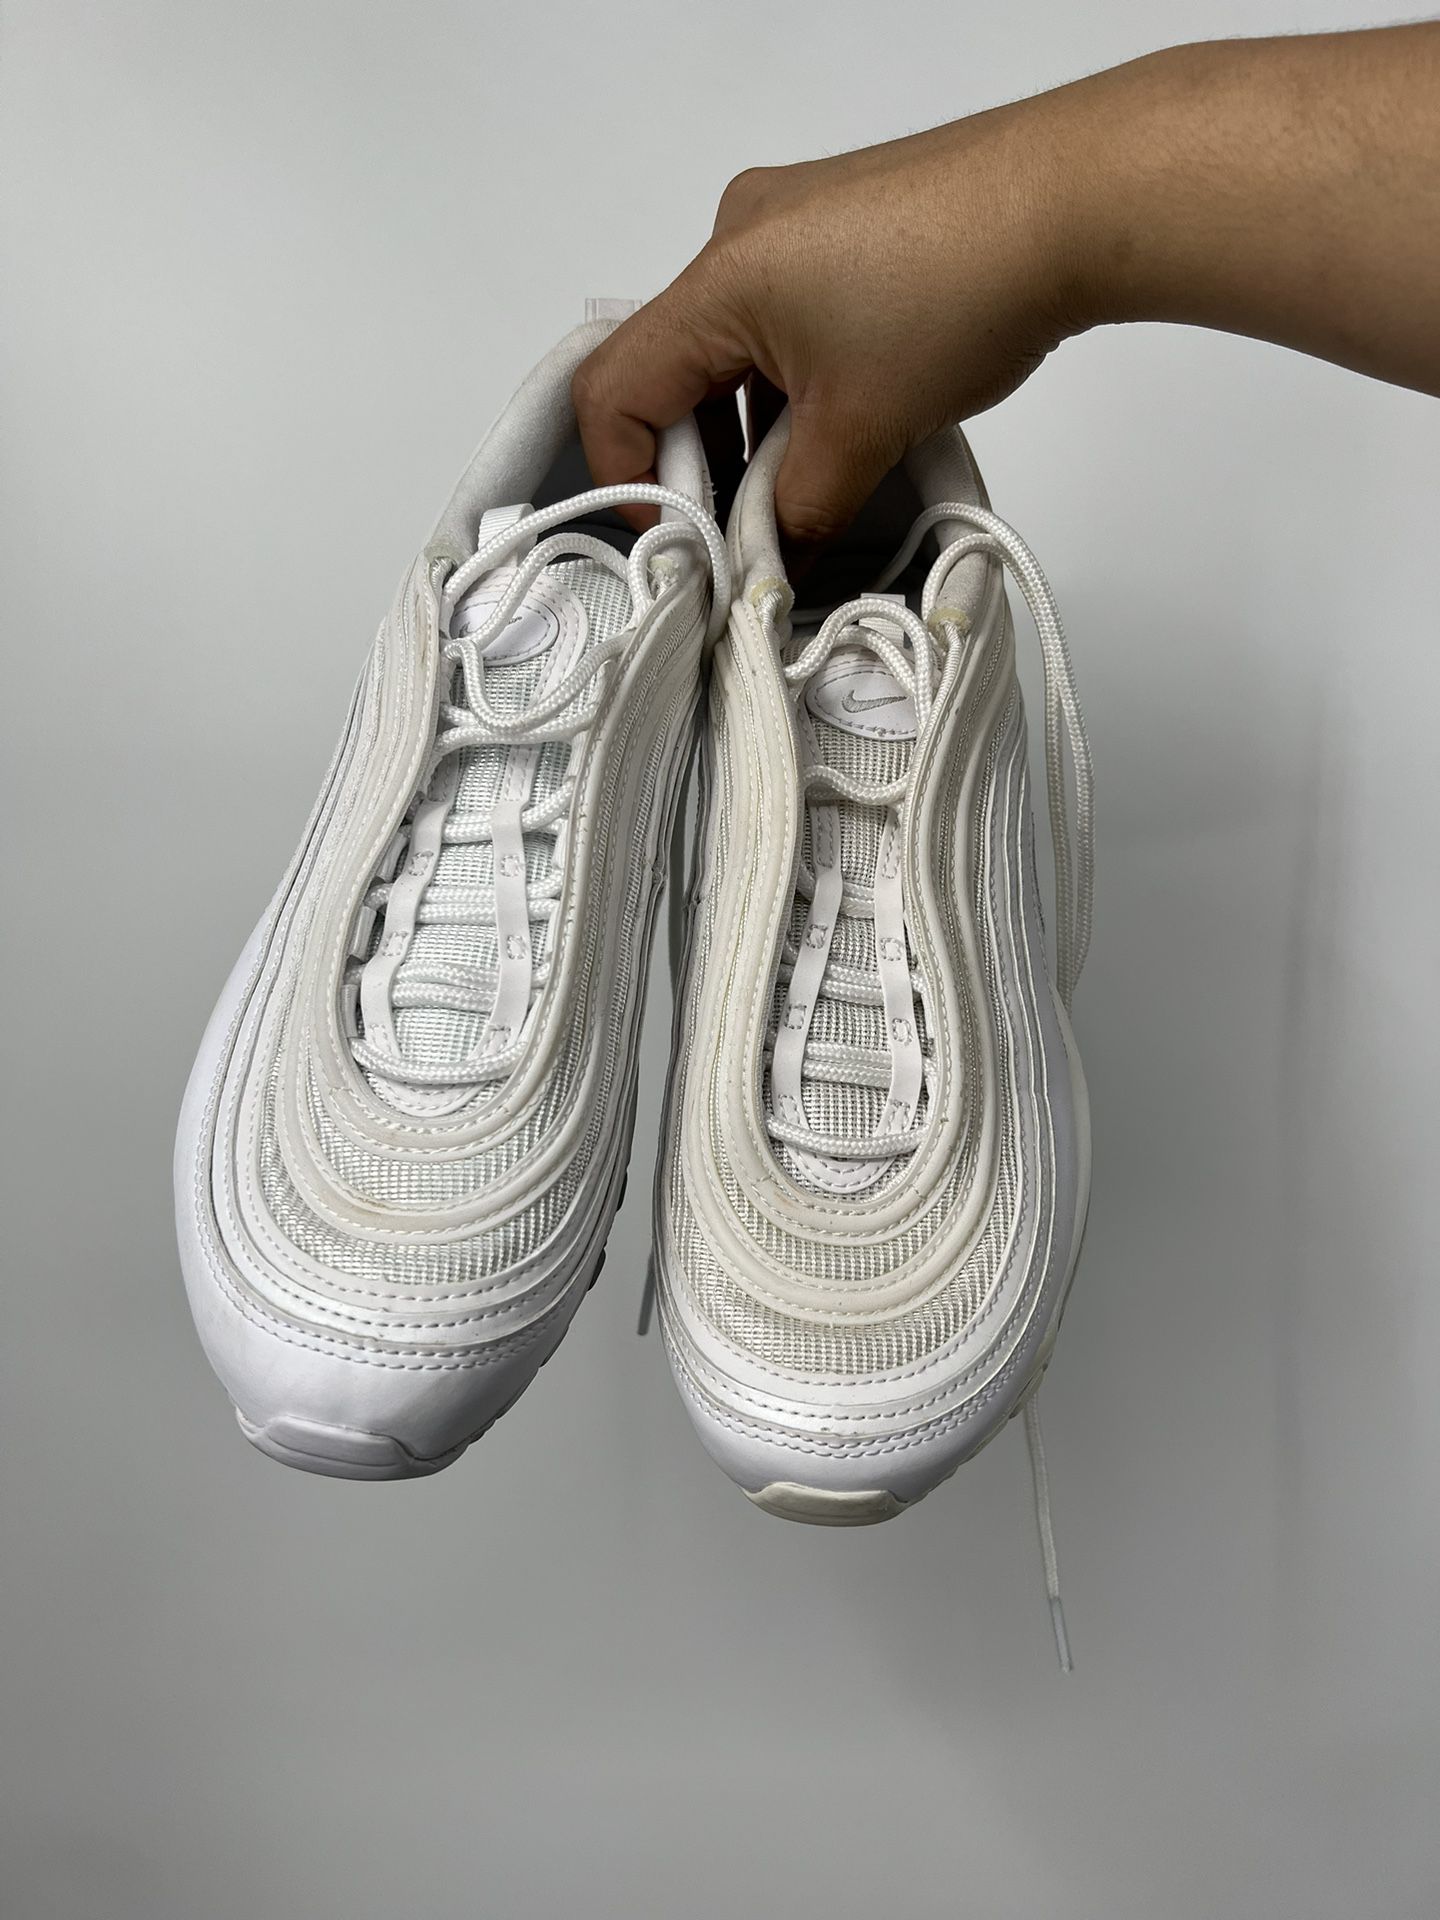 Nike Women's Air Max 97 White Athletic Sneakers Size 8.5